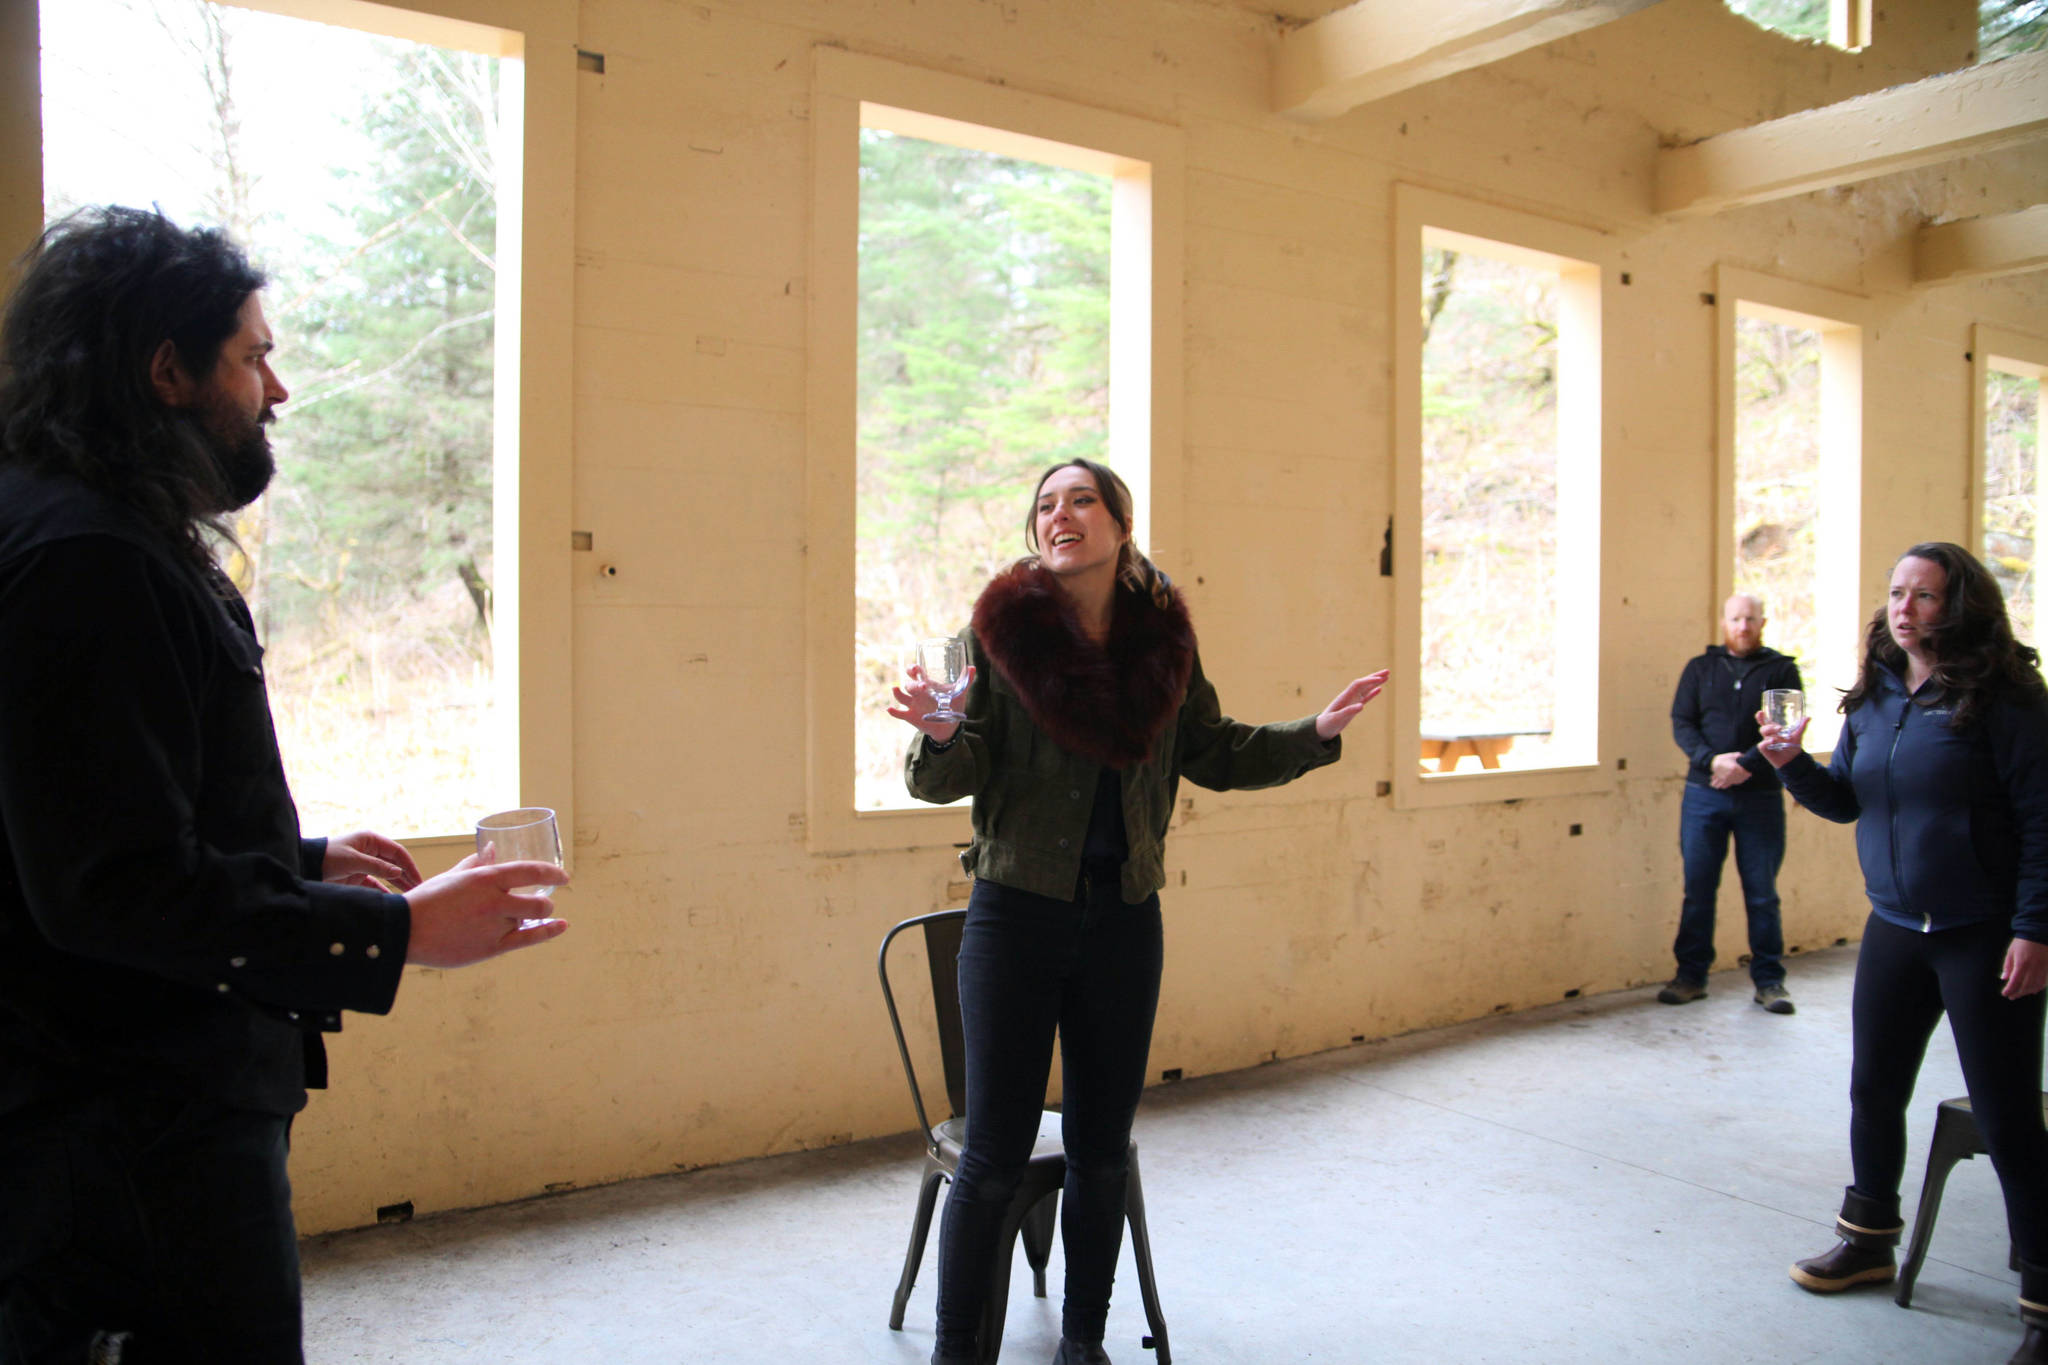 The cast of Macbeth rehearses in the Treadwell Mine office building as they preparee for the upcoming Theater Alaska Festival, which runs May 11 to 30 and features a Neighborhood Cabaret, readings and classes in addition to performances of Macbeth. All performances will be free and staged outdoors with no reservations required. (Courtesy Photo/ Flordelino Lagundio)